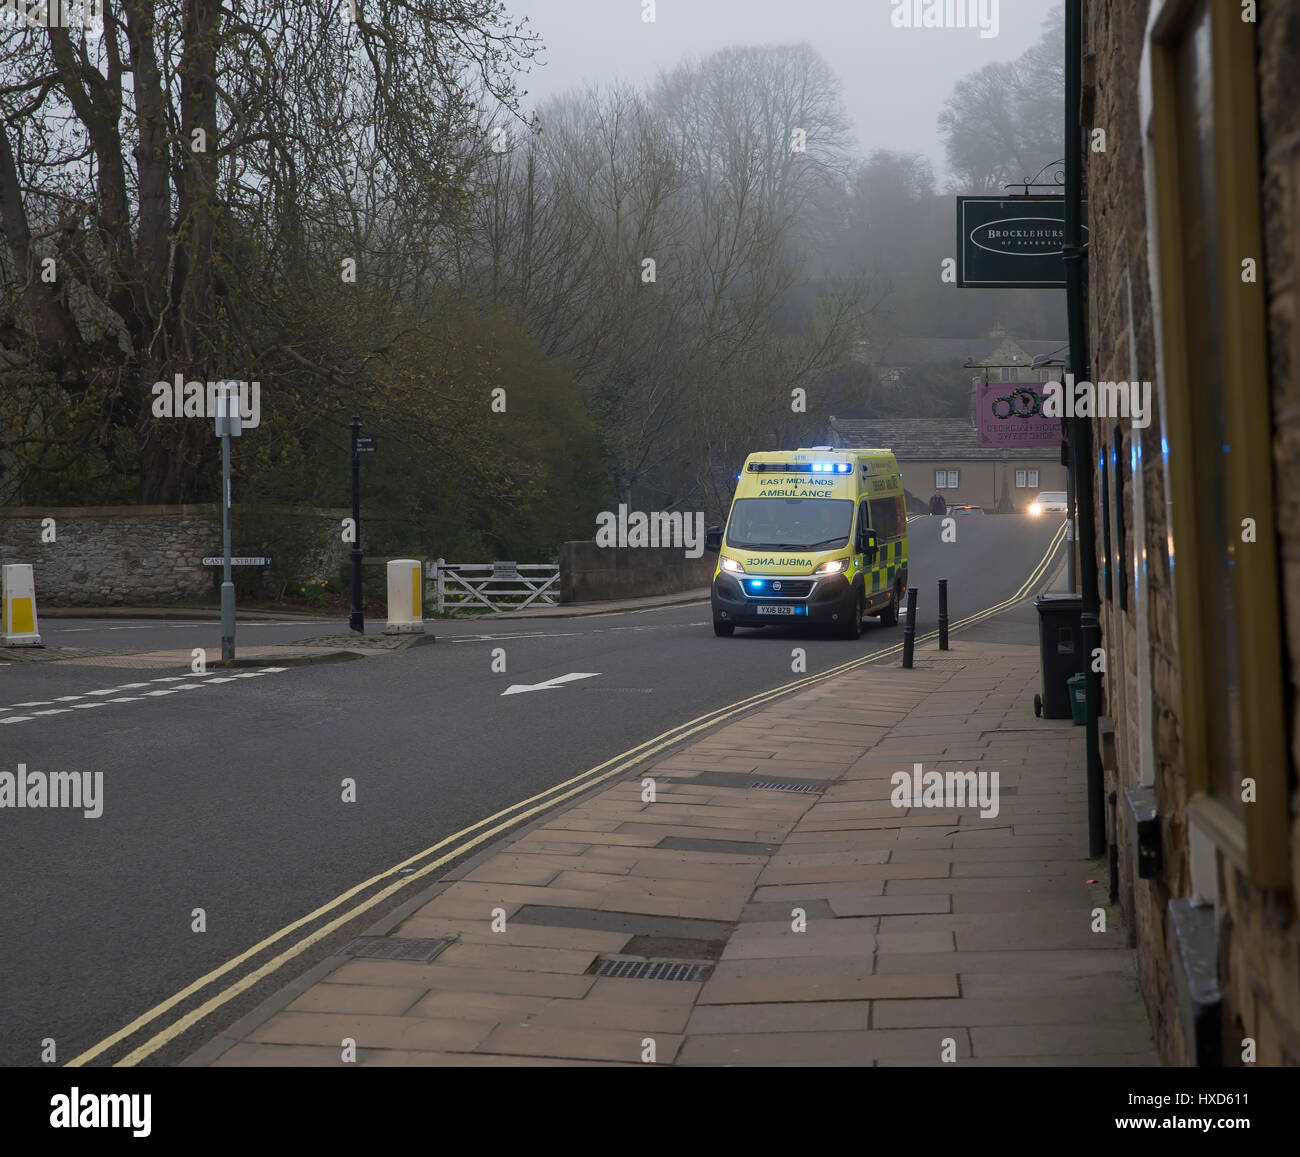 Bakewell, UK. 28th Mar, 2017. Early morning mist over Bakewell in Derbyshire Credit: Keith Larby/Alamy Live News Stock Photo